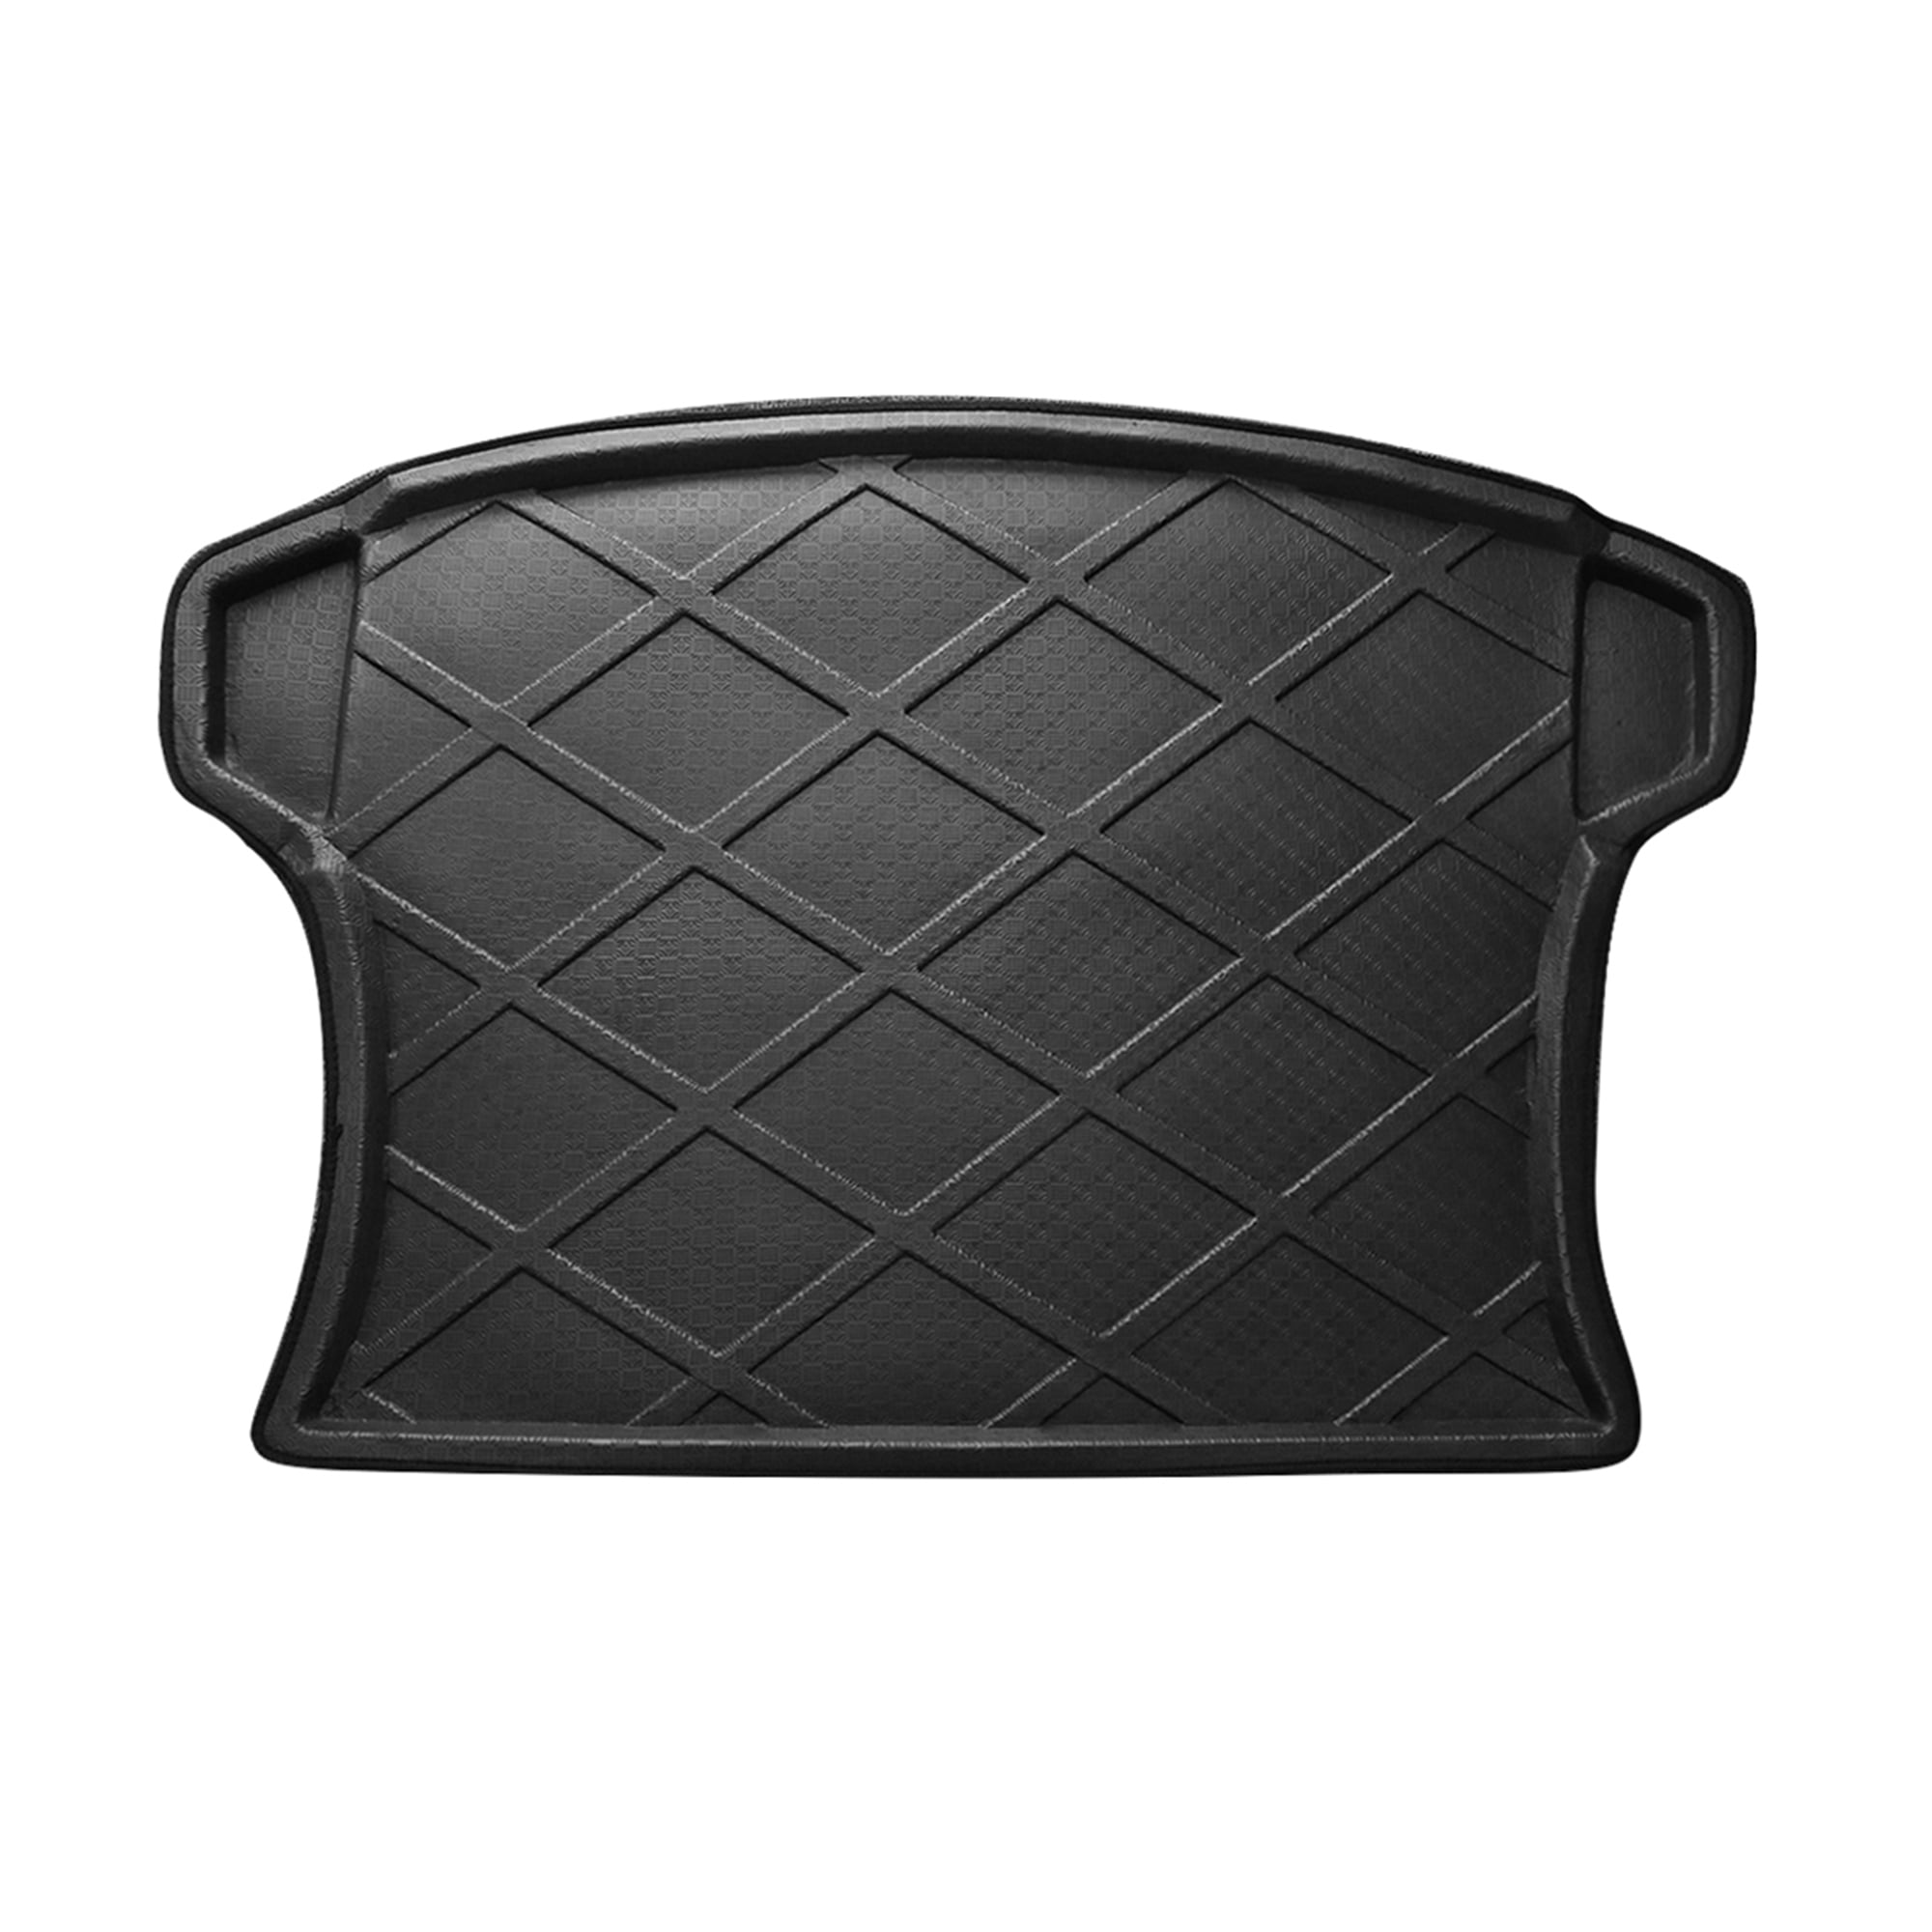 Auto Rear Cargo Floor Mat Trunk Tray Protector for Mazda CX-7 07-16, Size: One size, Black